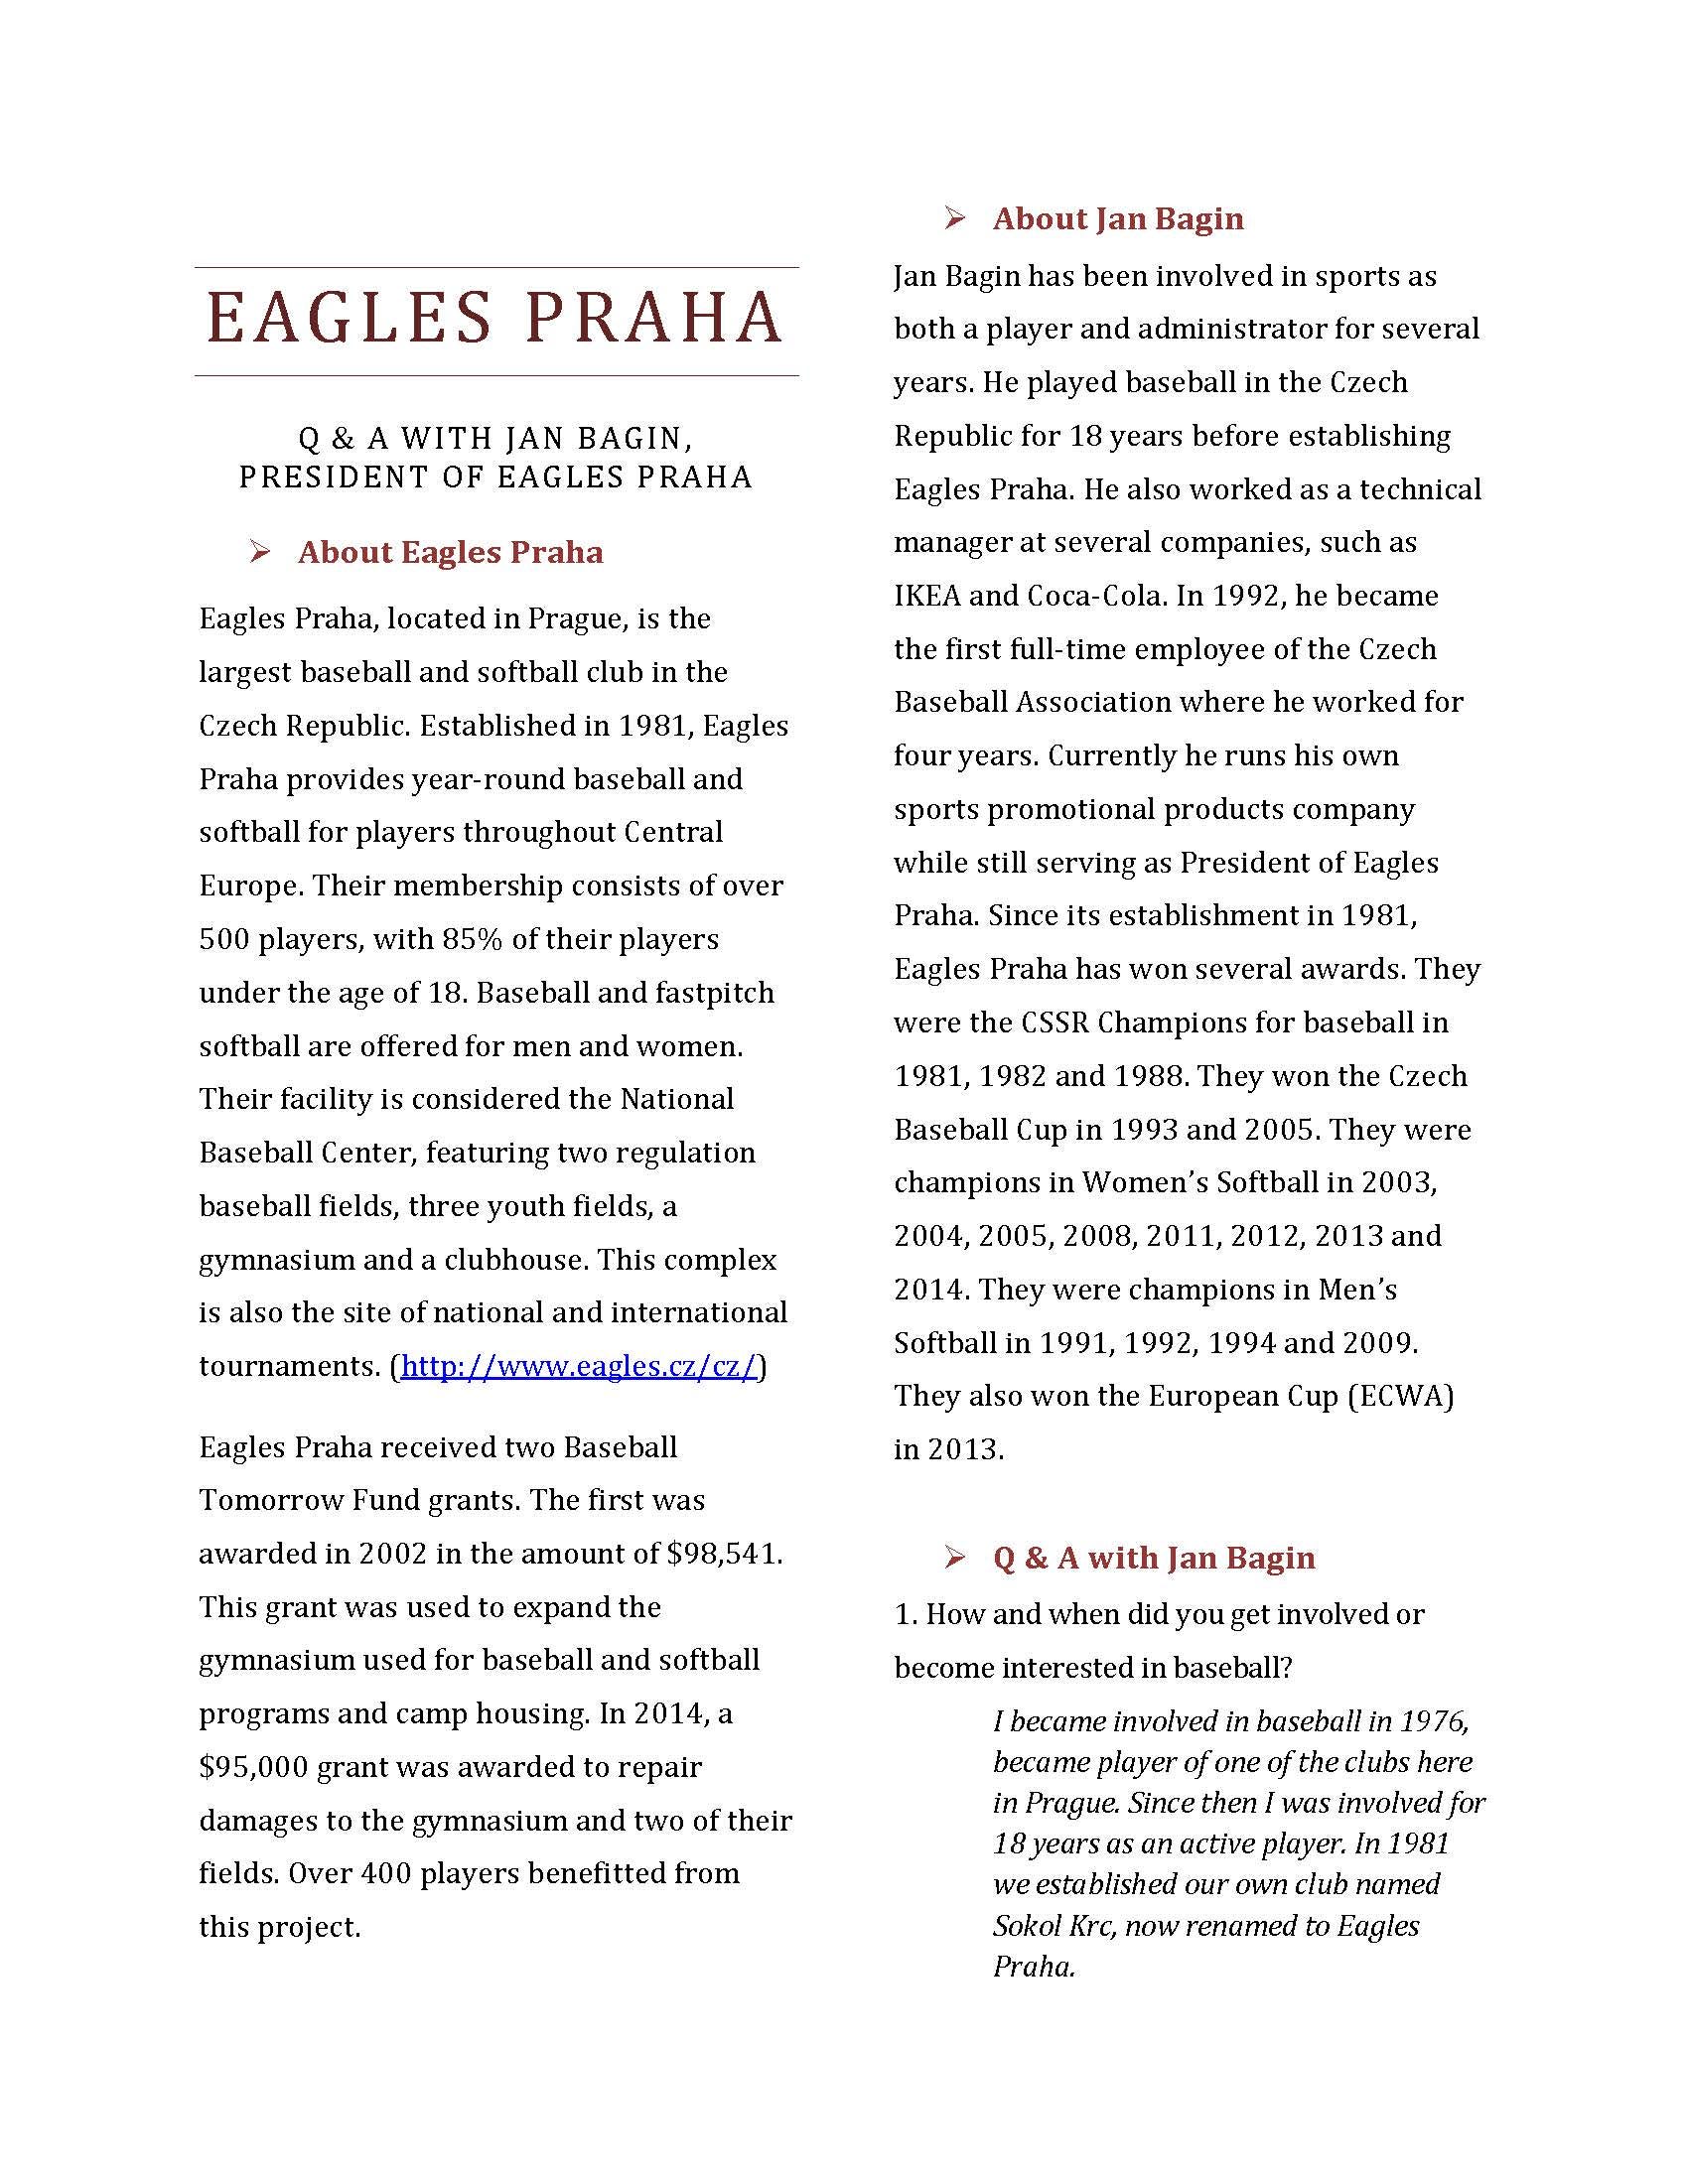 Eagles Praha. From the Grant Recipient Archives | by Baseball Tomorrow Fund  | Medium